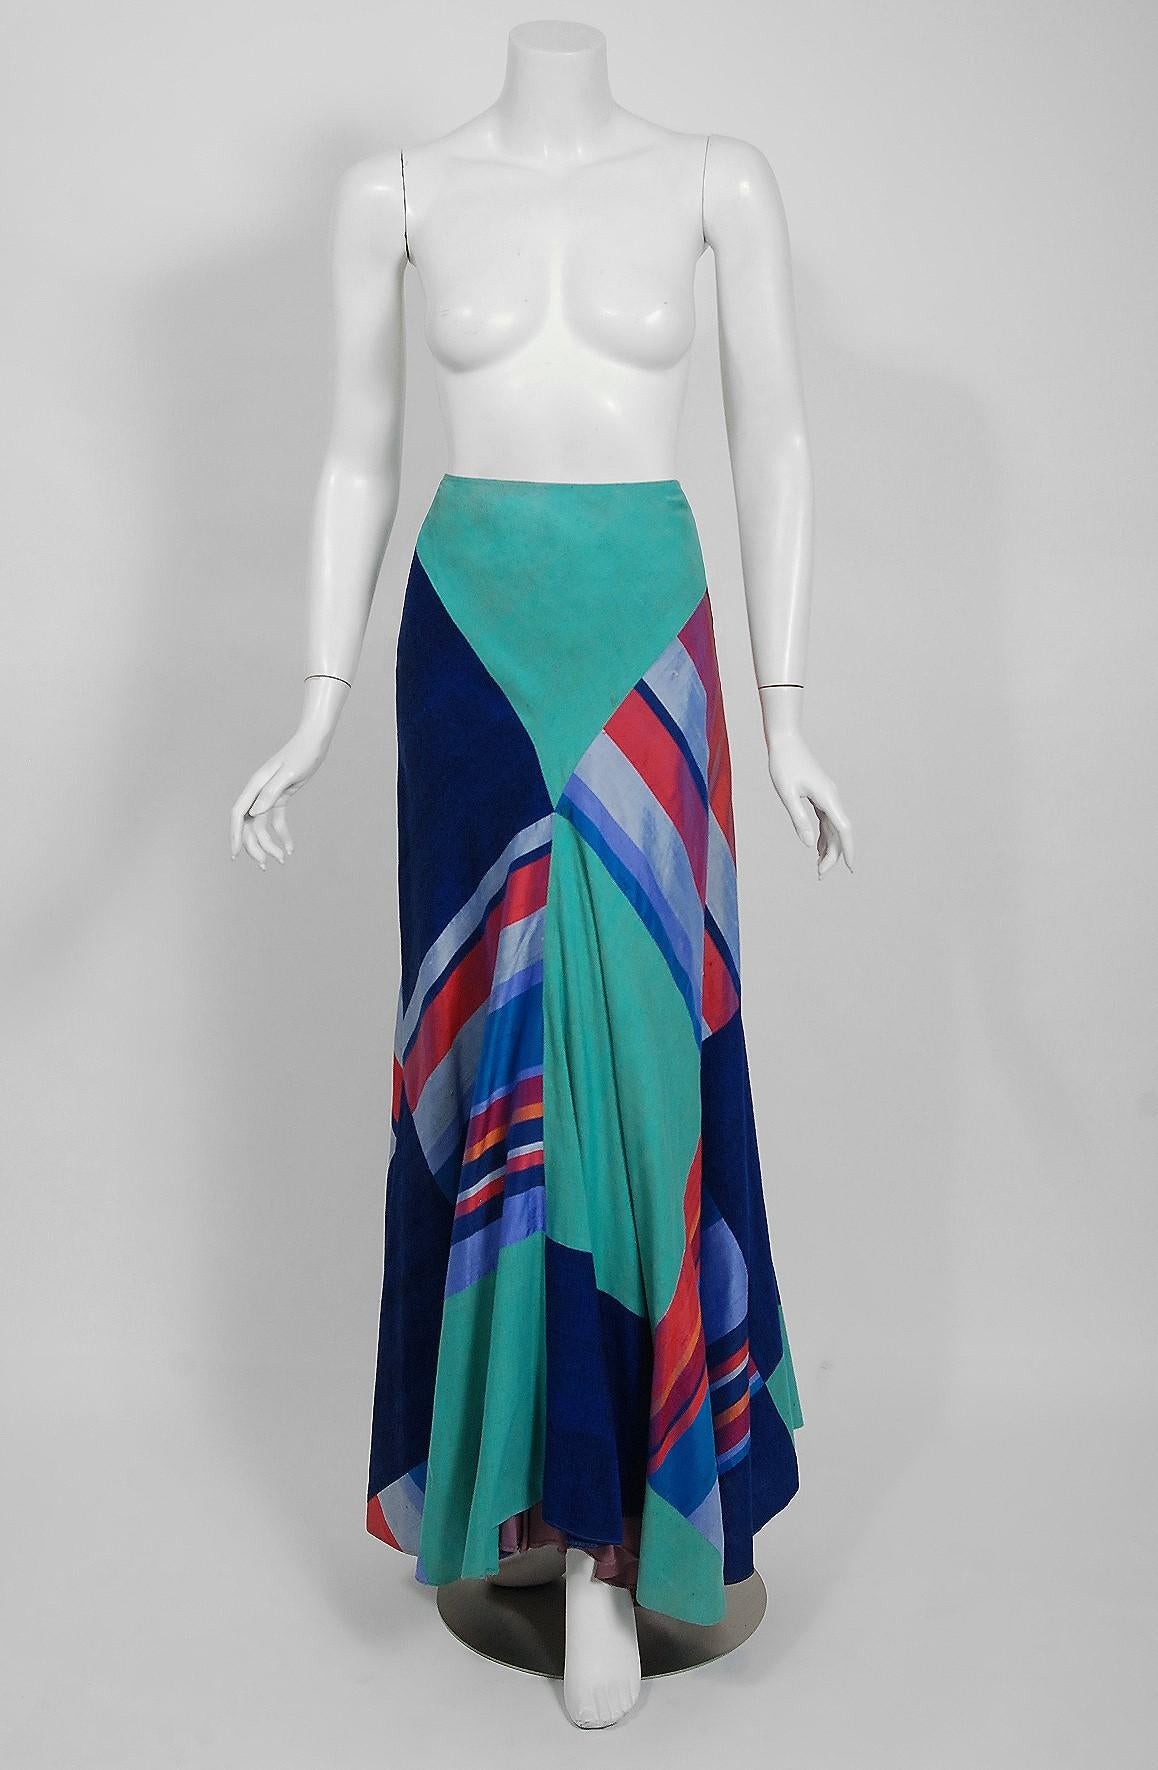 Breathtaking Thea Porter Couture maxi skirt fashioned in luxurious multi-colored silk. Just look at the decadent patchwork construction. I love the nipped waist sculpted bias-cut shape with unique asymmetric hemline. Thea Porter was largely inspired